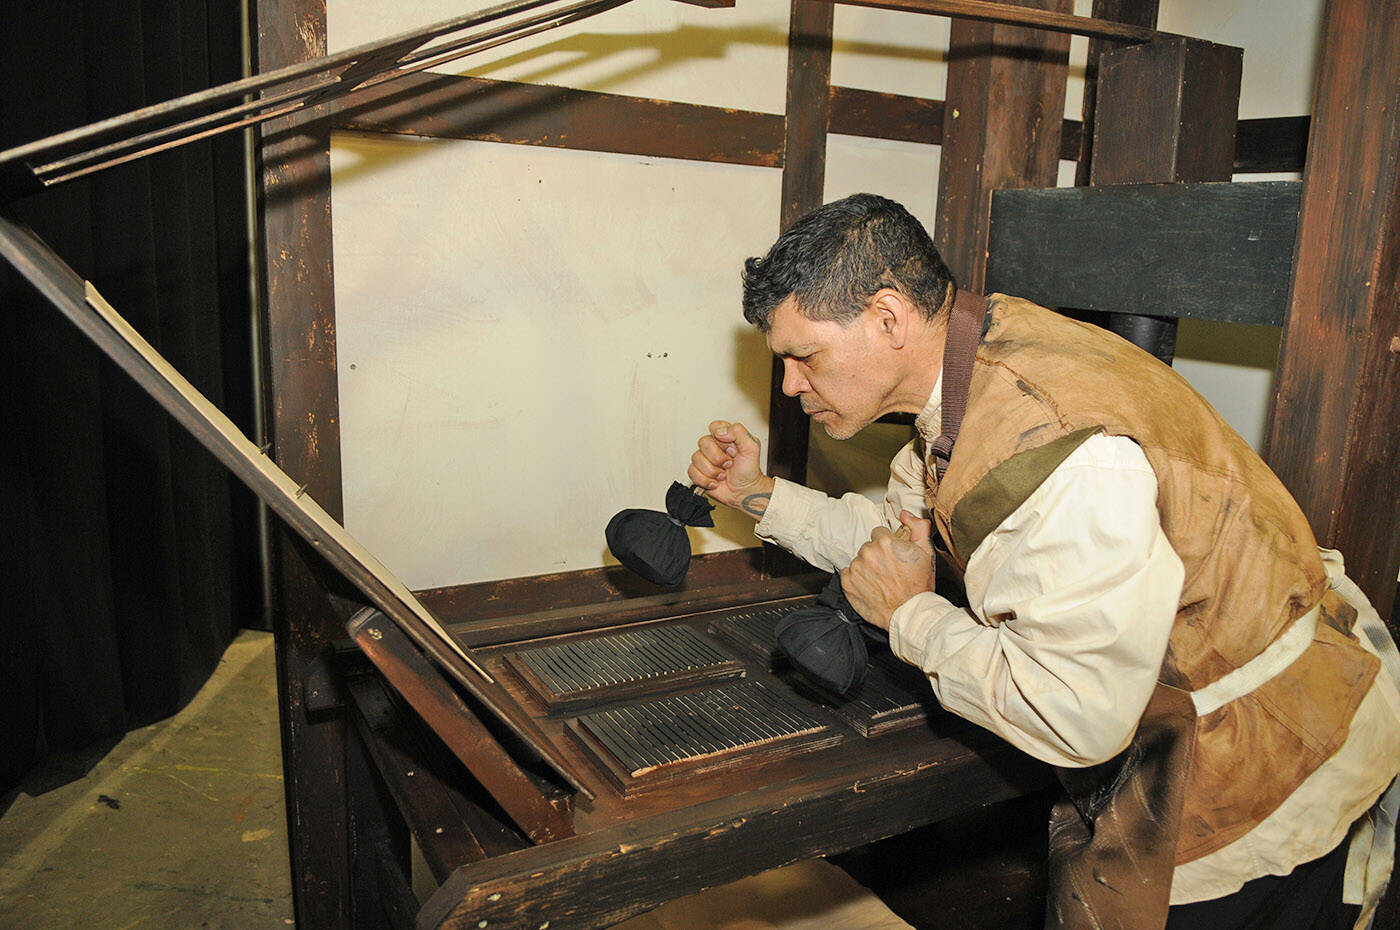 Lenny Fisher plays Marcus in the Chilliwack Players Guild production of The Book of Will which is at the Chilliwack Cultural Centre April 20 to 30. He is seen here using ink balls while pretending to ink up a handmade 17th-century style Gutenberg printing press made by guild member Rick Funk. (Jenna Hauck/ Chilliwack Progress)